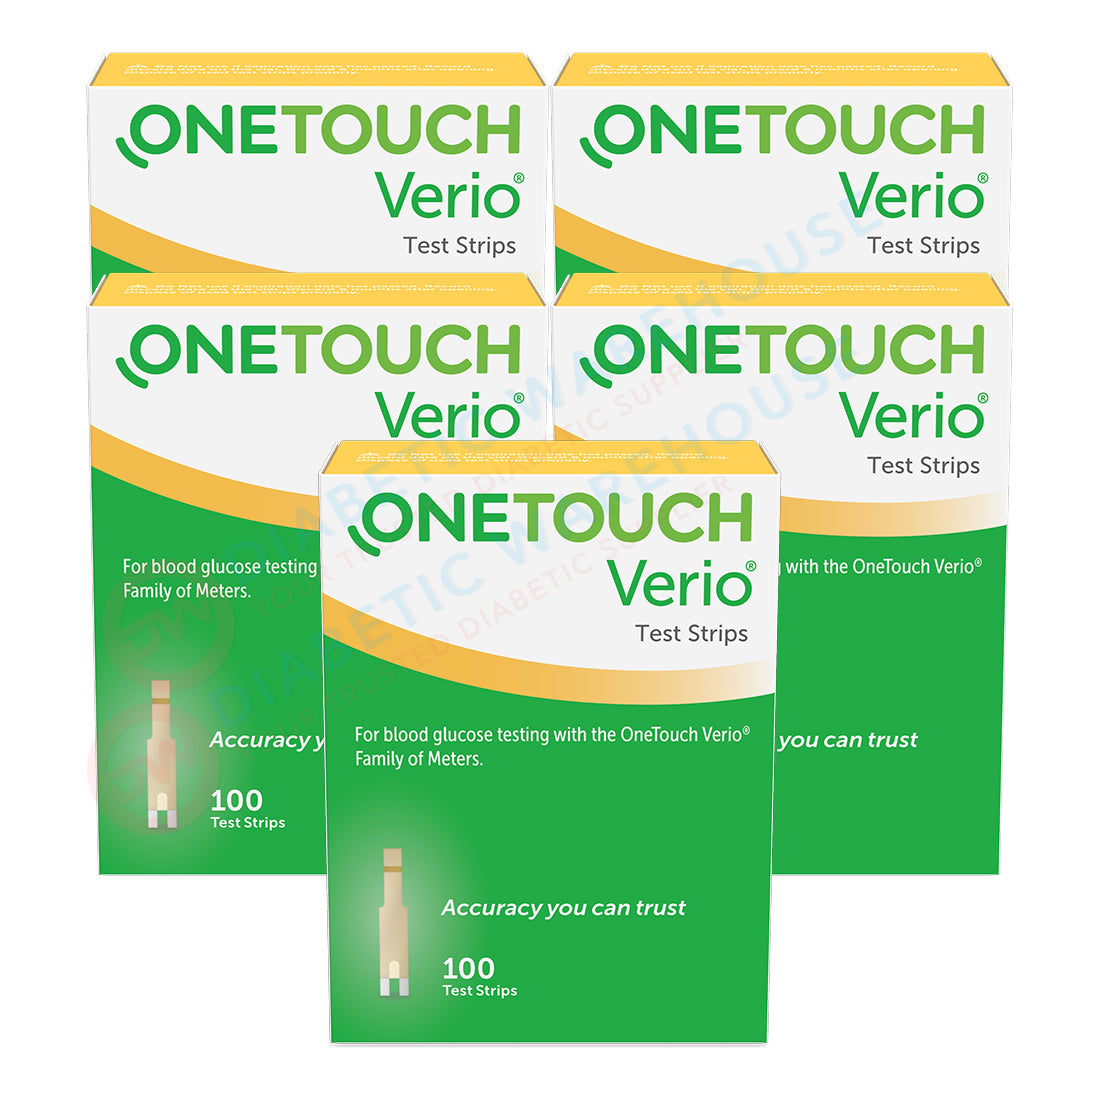 One Touch Verio Test Strips 500ct